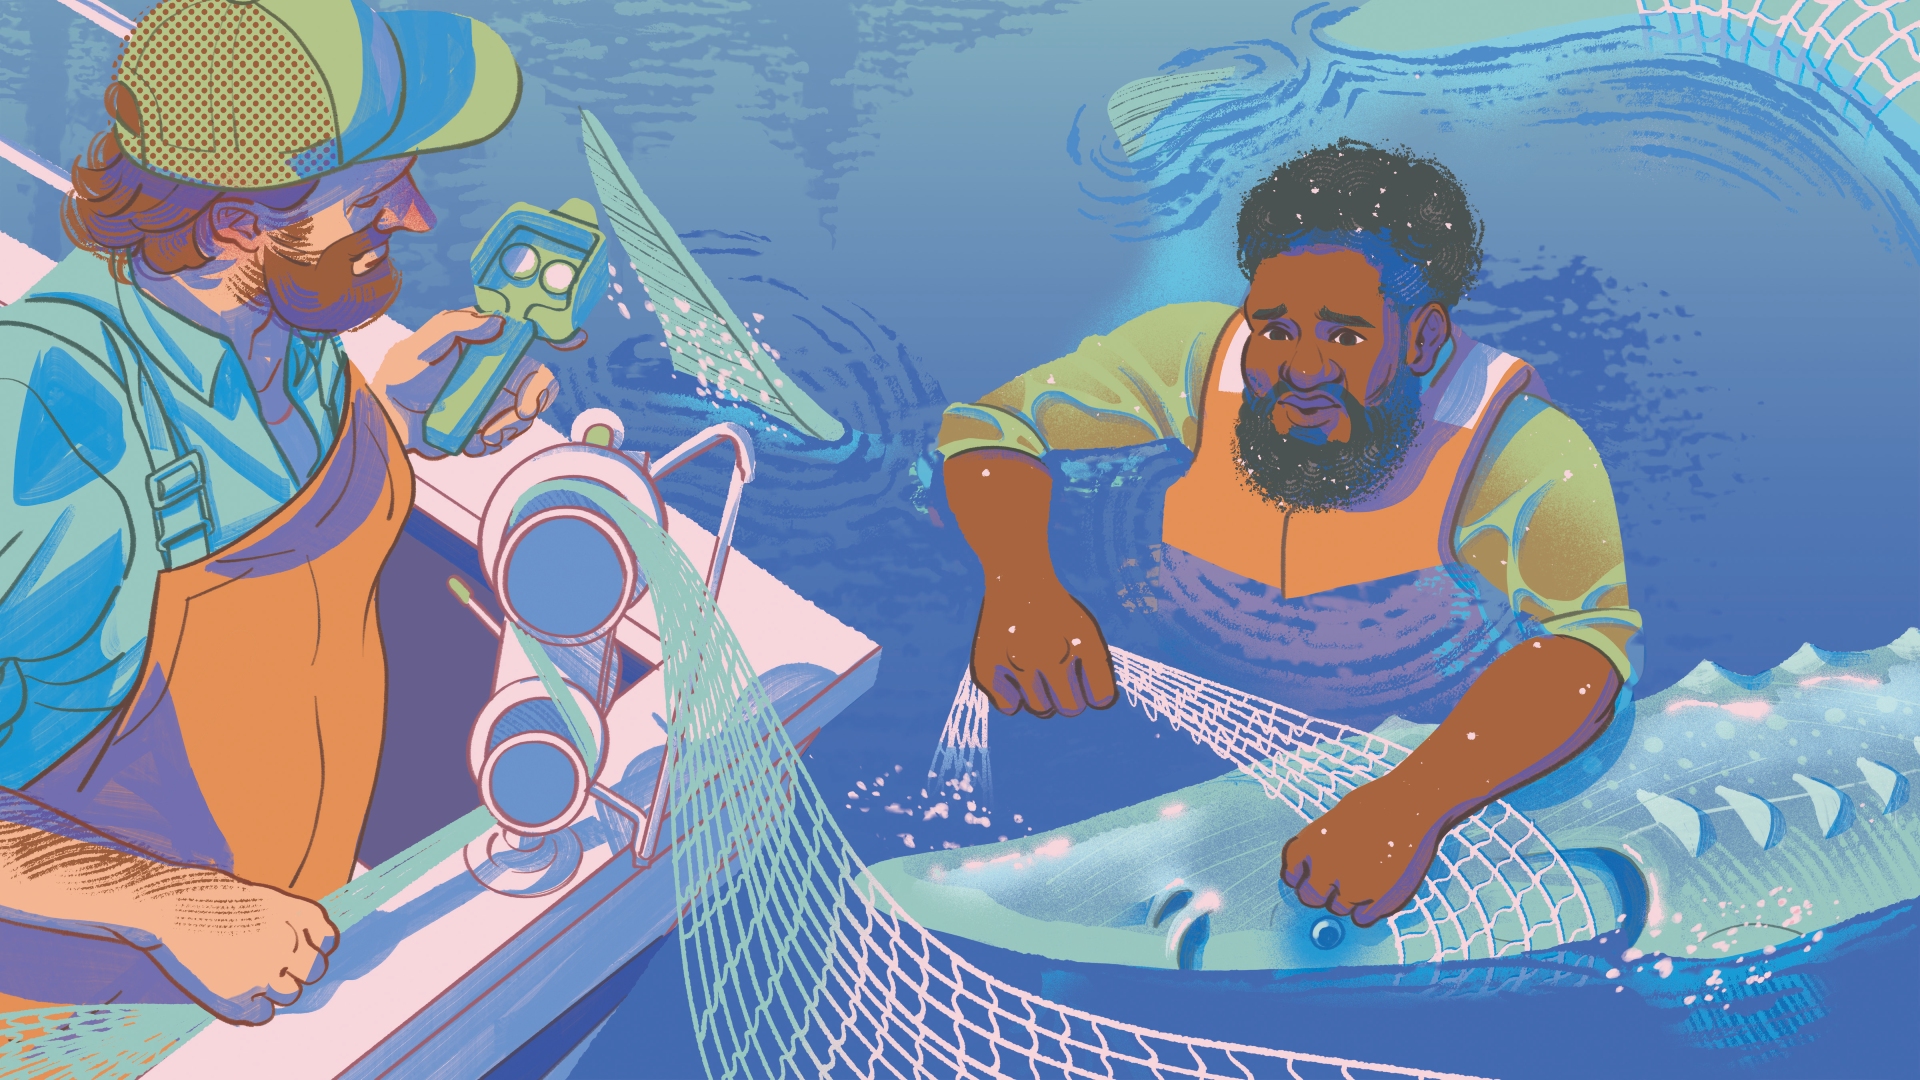 An illustration with a soft color palette. A Black man in the water wrestles with a sturgeon fish in a net. A white man looks on from a boat.